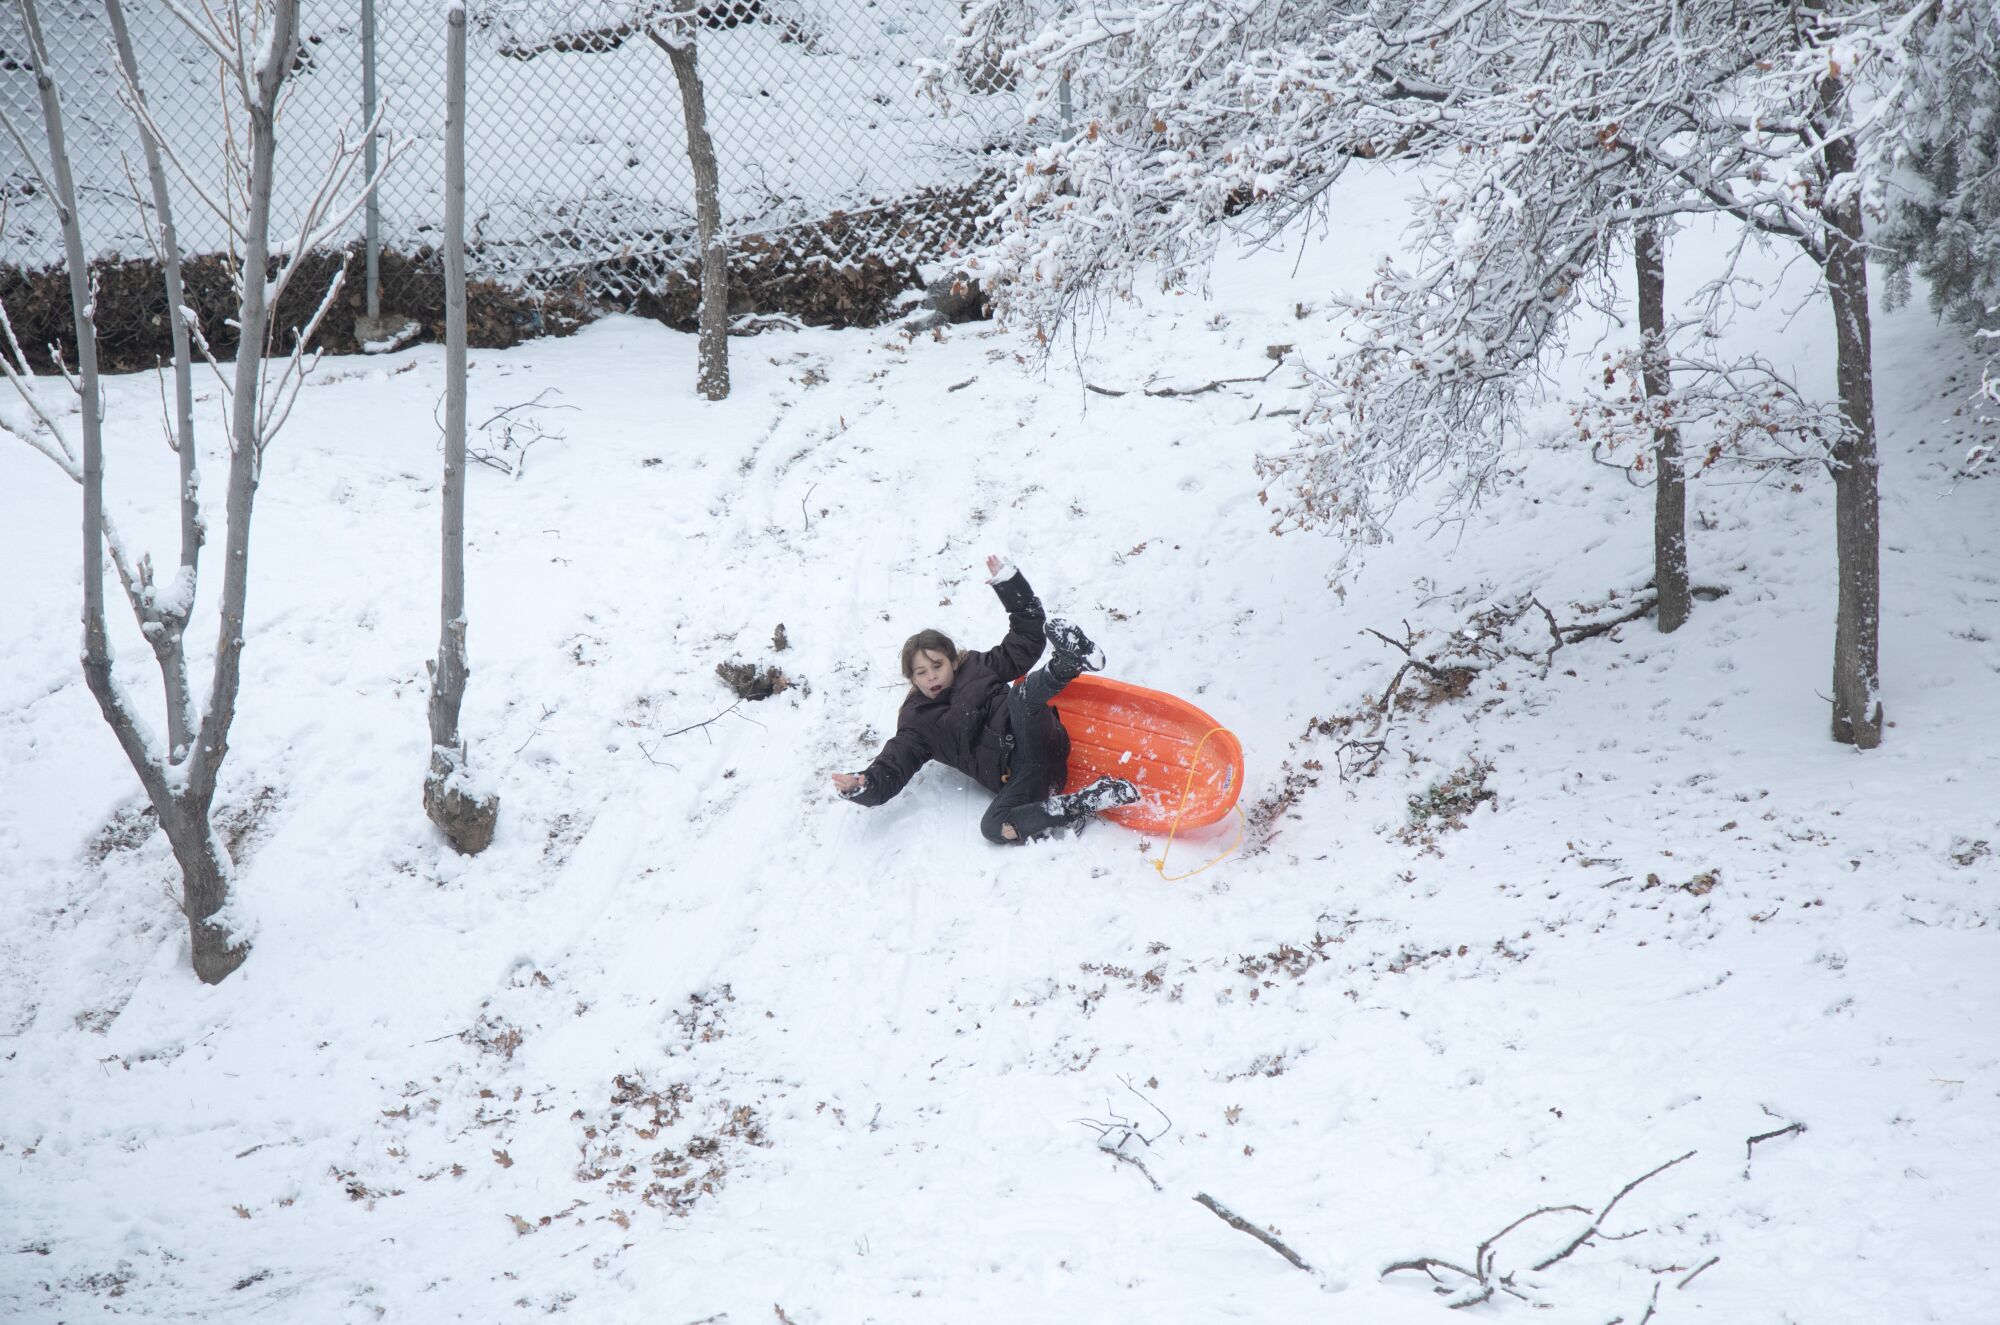 Hailey Long, 8, falls while sledding down a small hill at her home in Frazier Park.